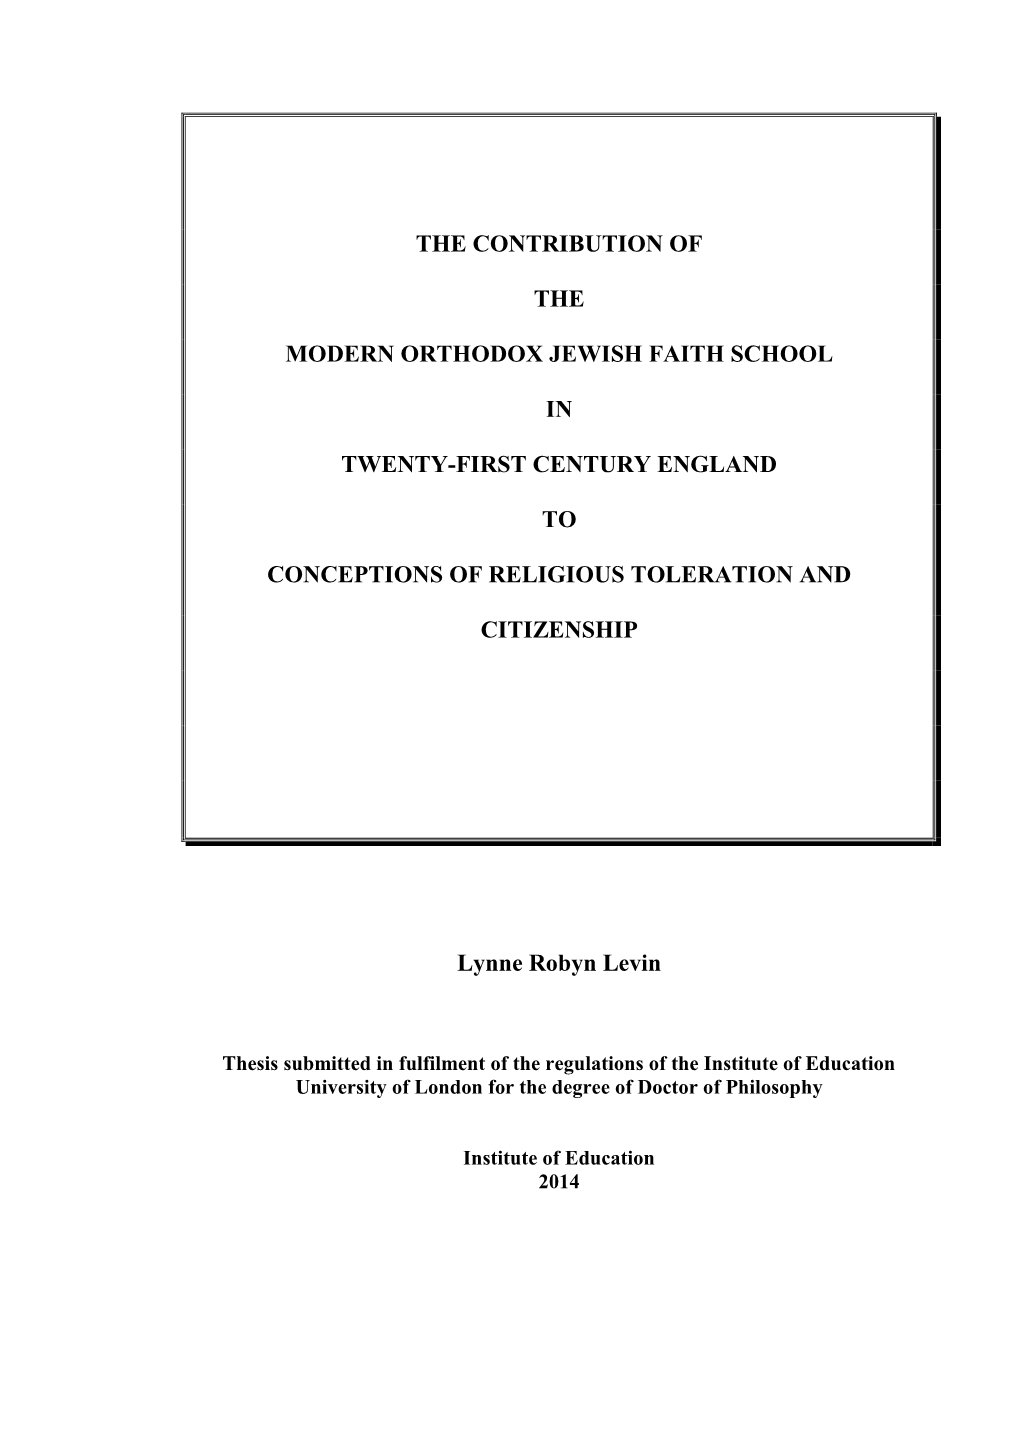 The Contribution of the Modern Orthodox Jewish Faith School to Twenty-First Century Liberal Democratic England As a Community of Tolerant Practice 7.1 Introduction